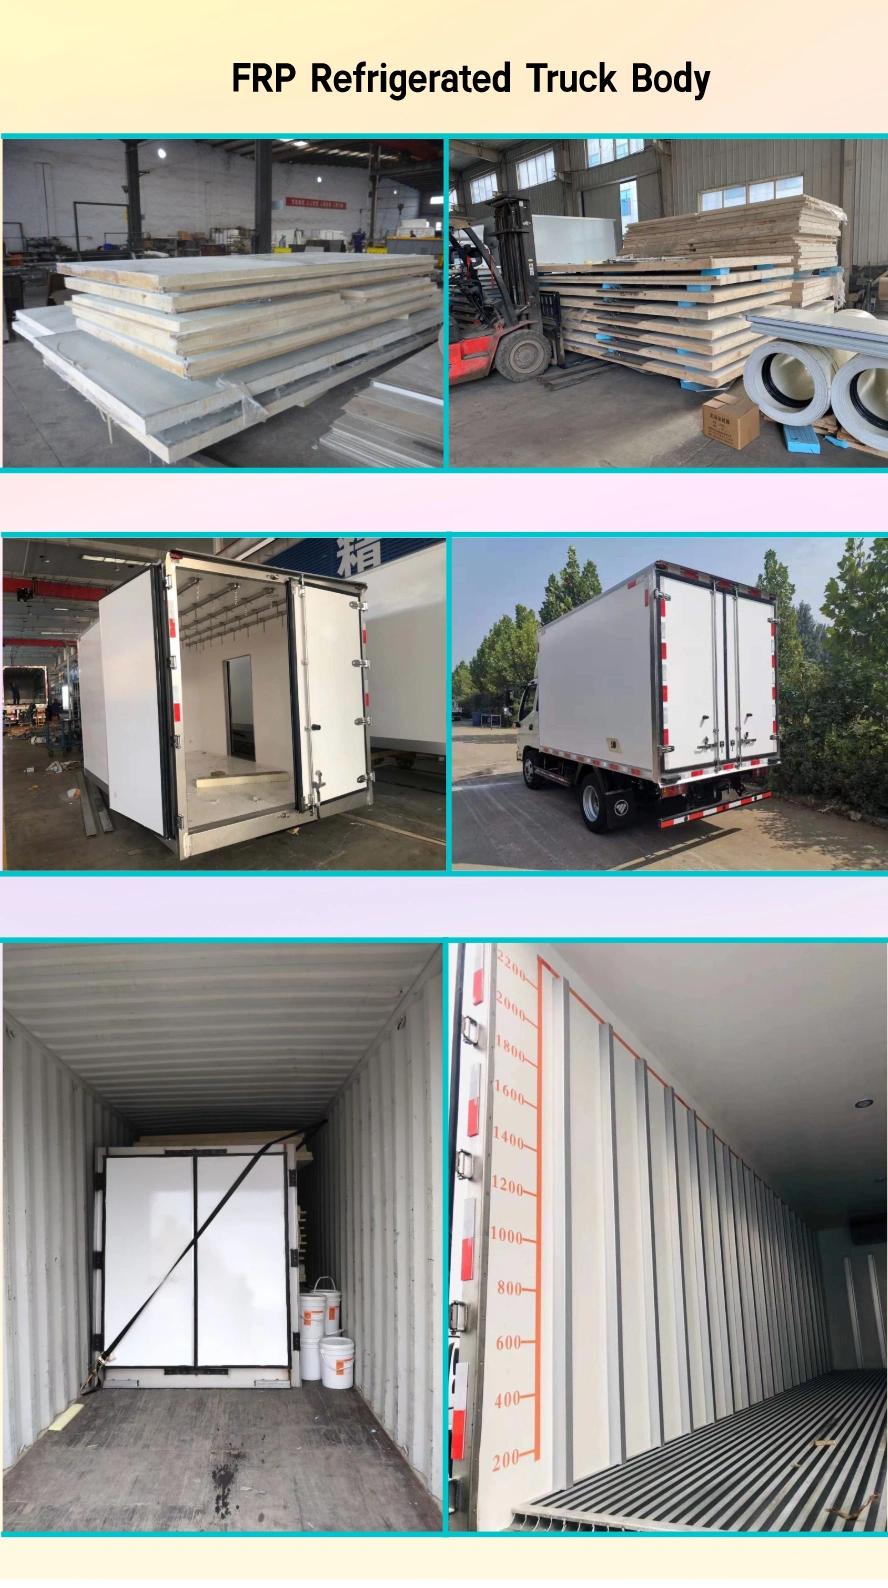 Bueno China New Bueno 3t 4t Cold Storage Truck Refrigerated Truck Body for Sinotruk HOWO Hino Shacman Refrigerated Truck